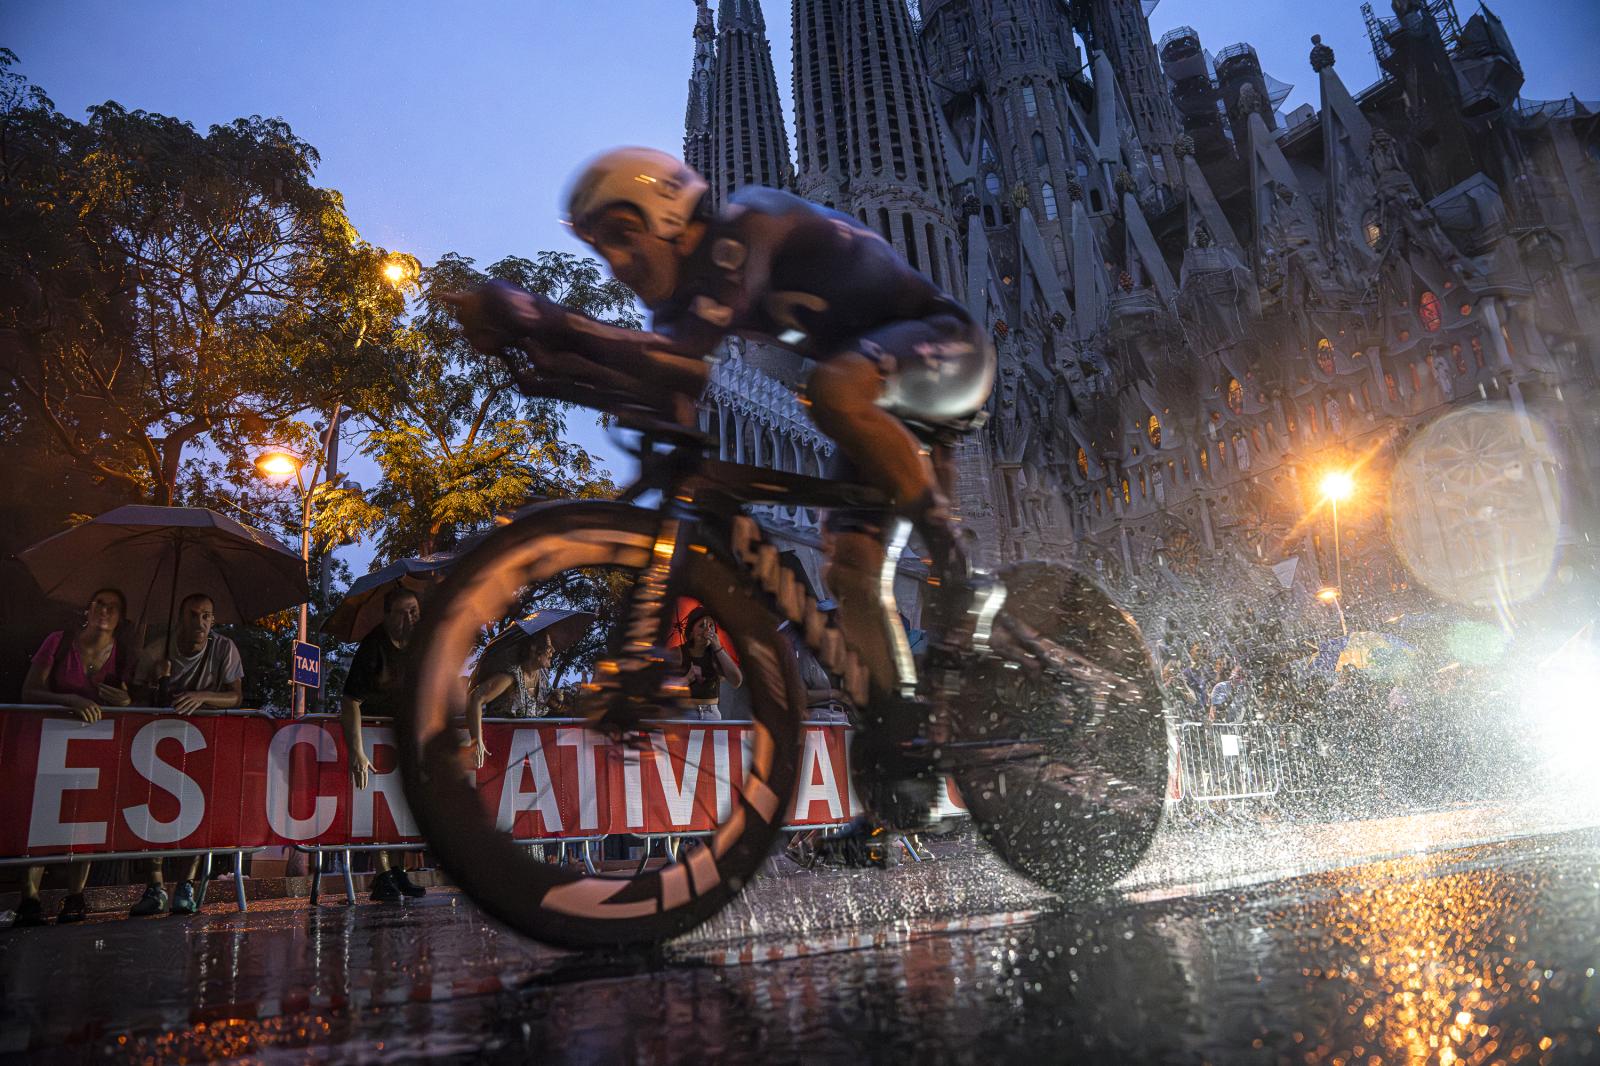 Image from DAILY NEWS - A member of the Movistar Team, Canyon bikes, during the...